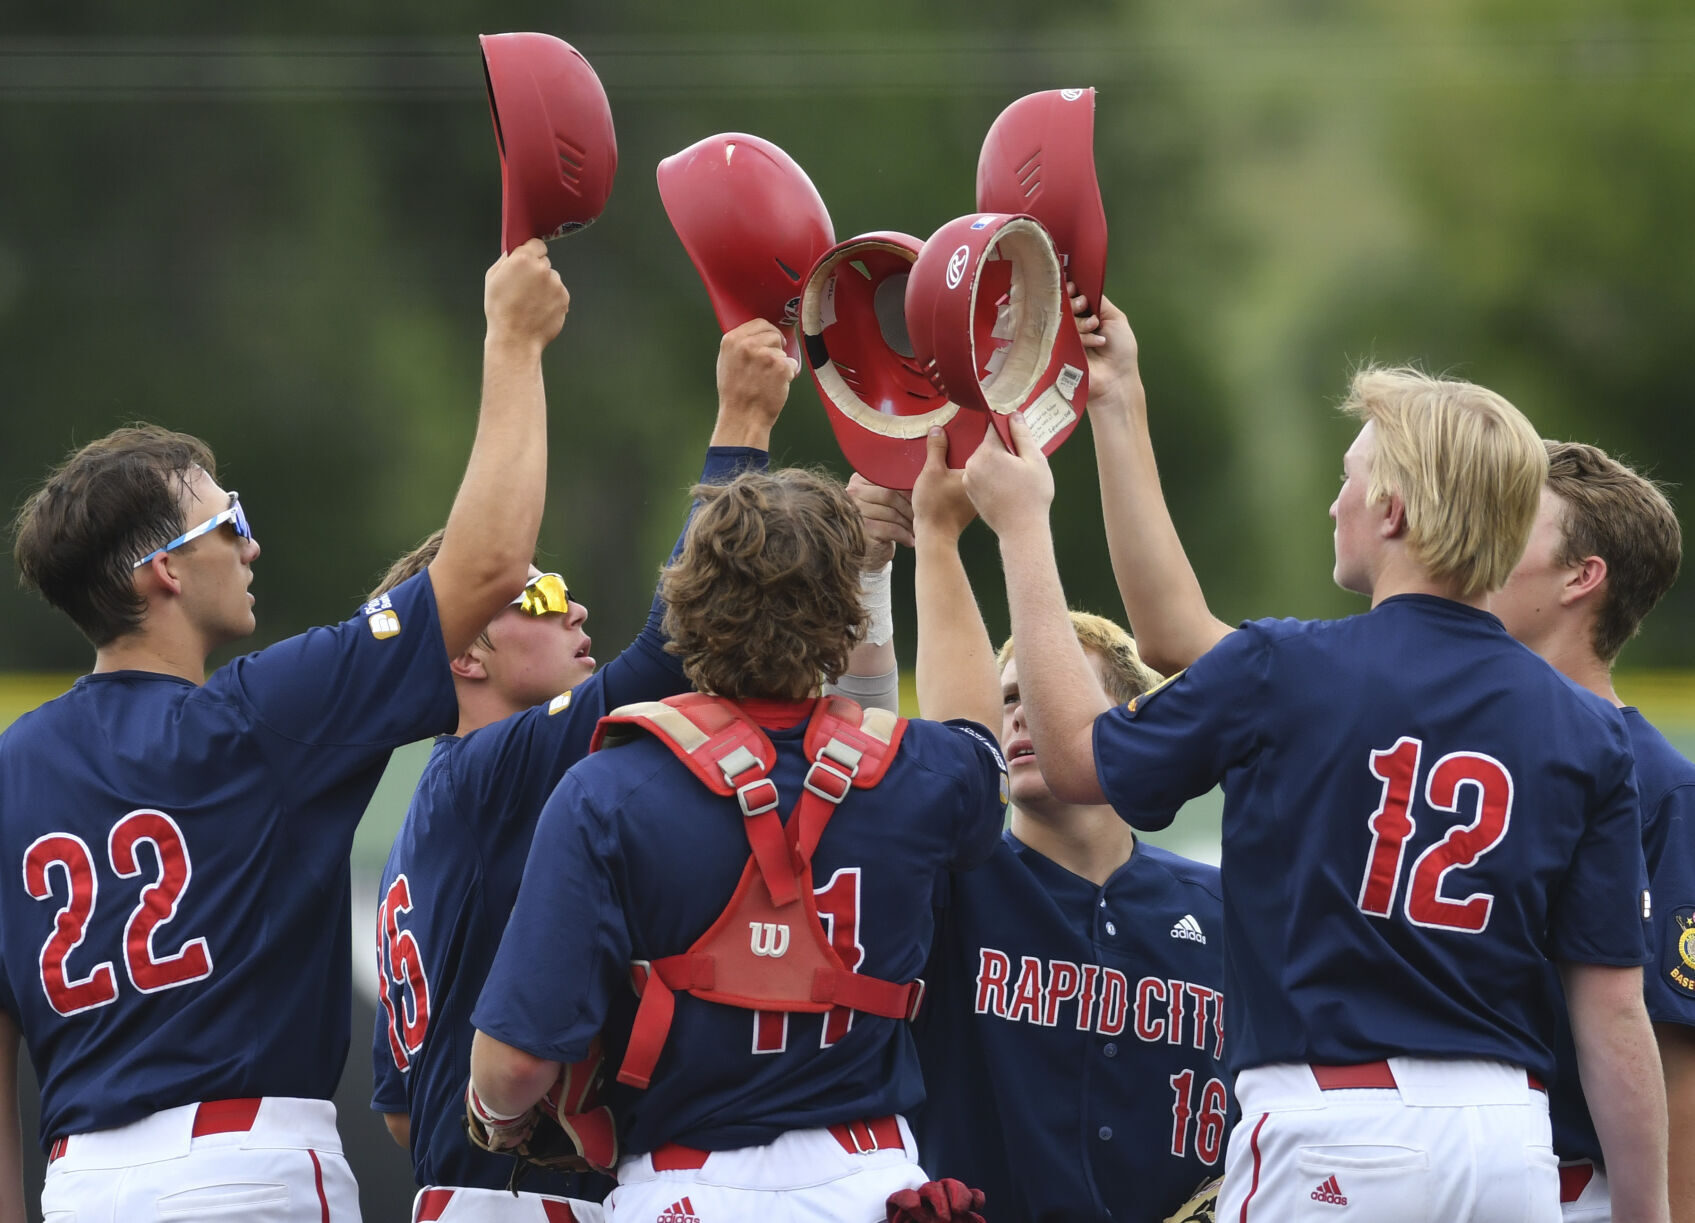 SDHSAA Board Initiates Baseball Sanctioning Process in Response to American Legion Request